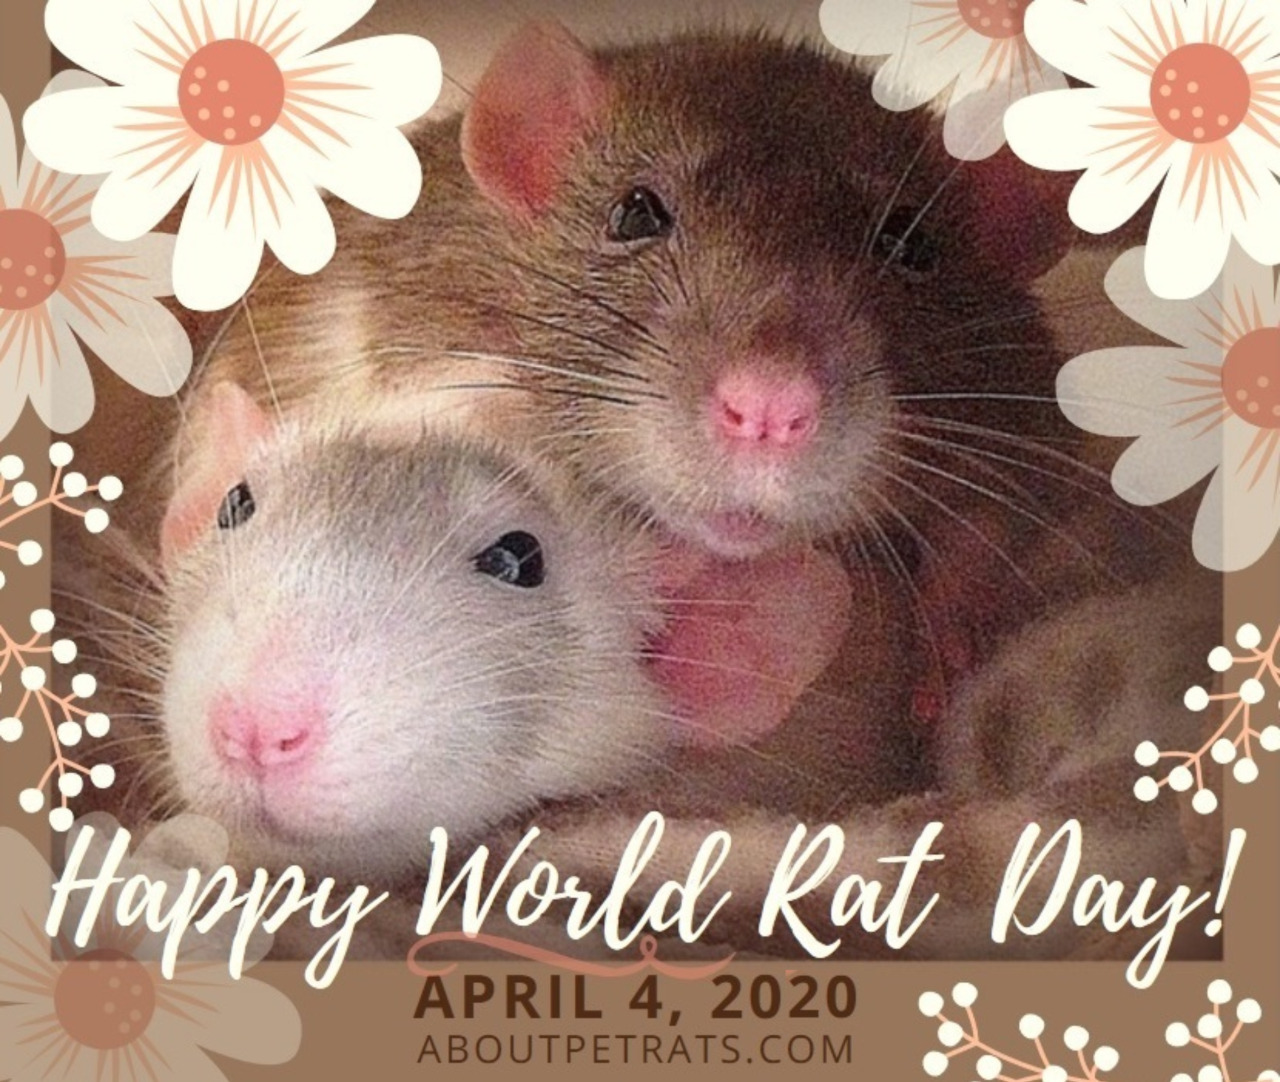 World Rat Day Best Event in The World